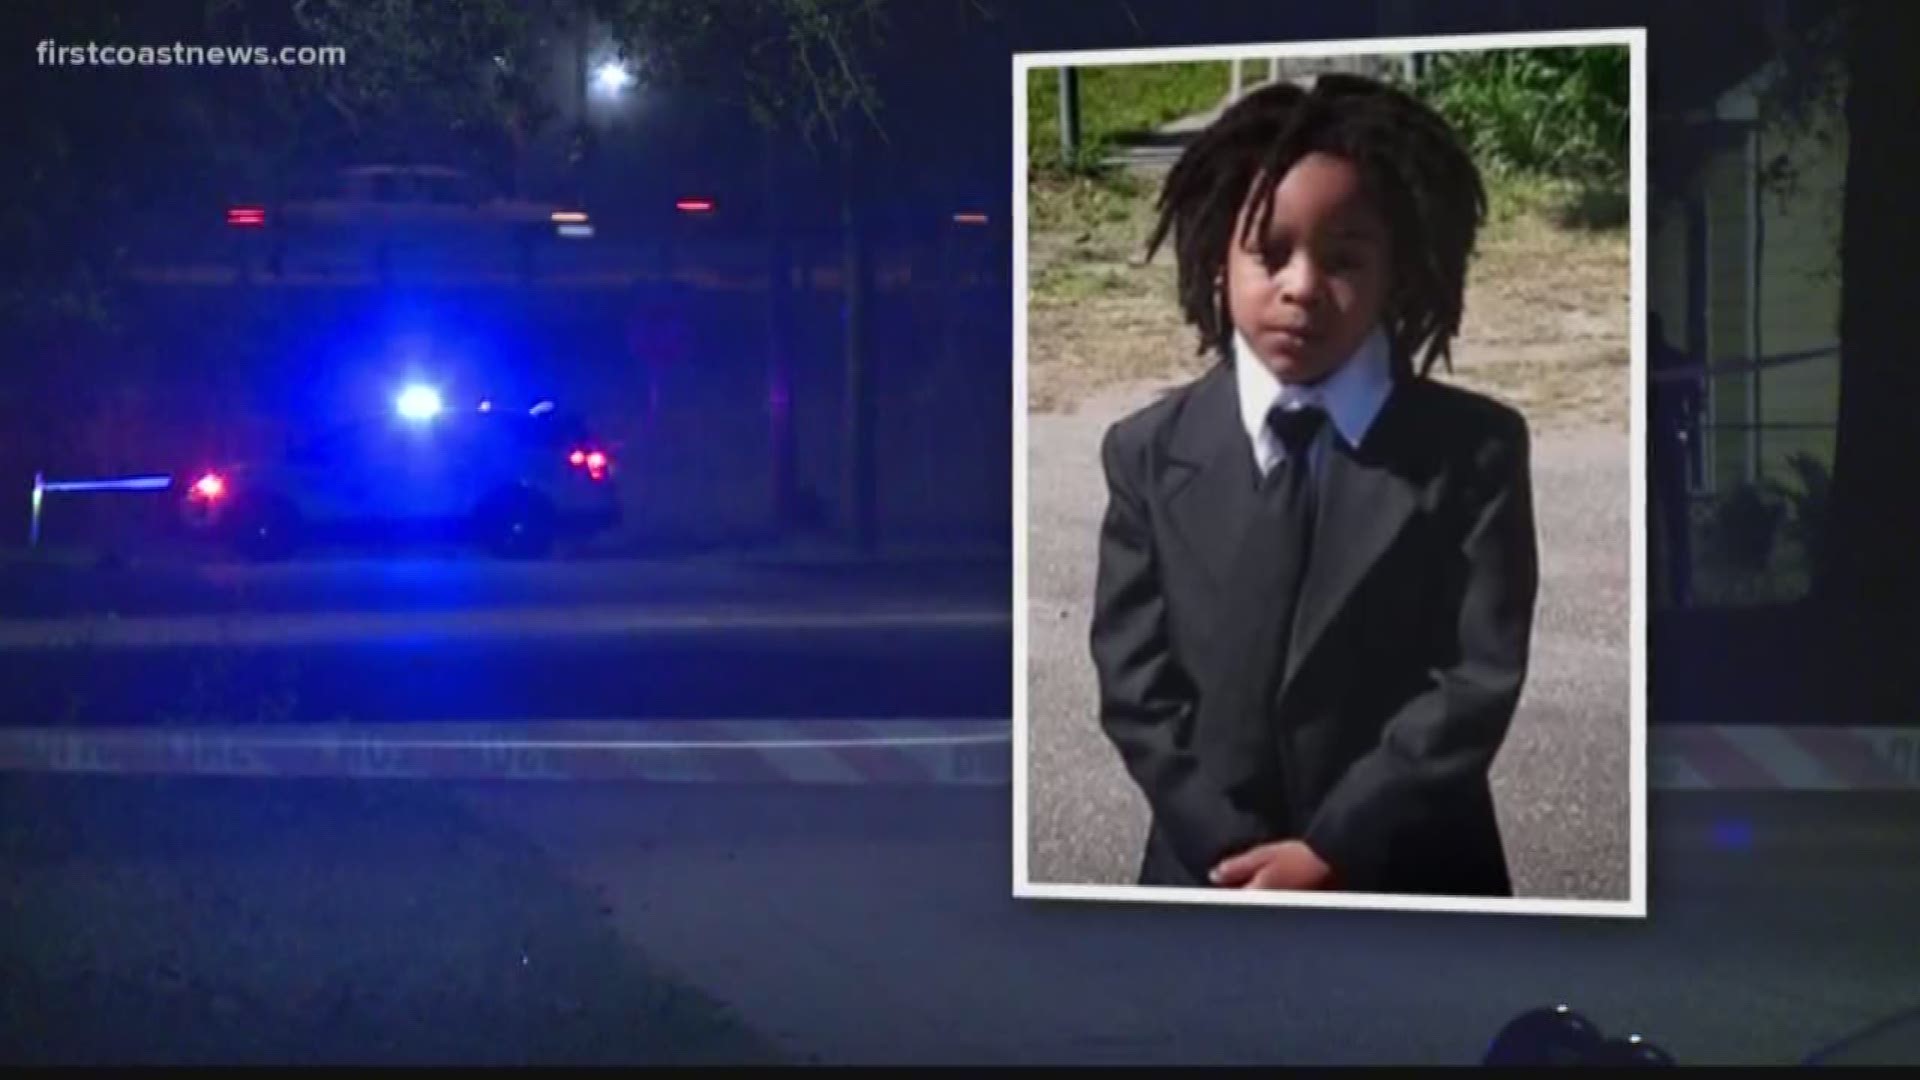 The State Attorney's Office (SAO) released new information regarding the death investigation of 7-year-old Tashawn Gallon, who was shot and killed back in February 2018.